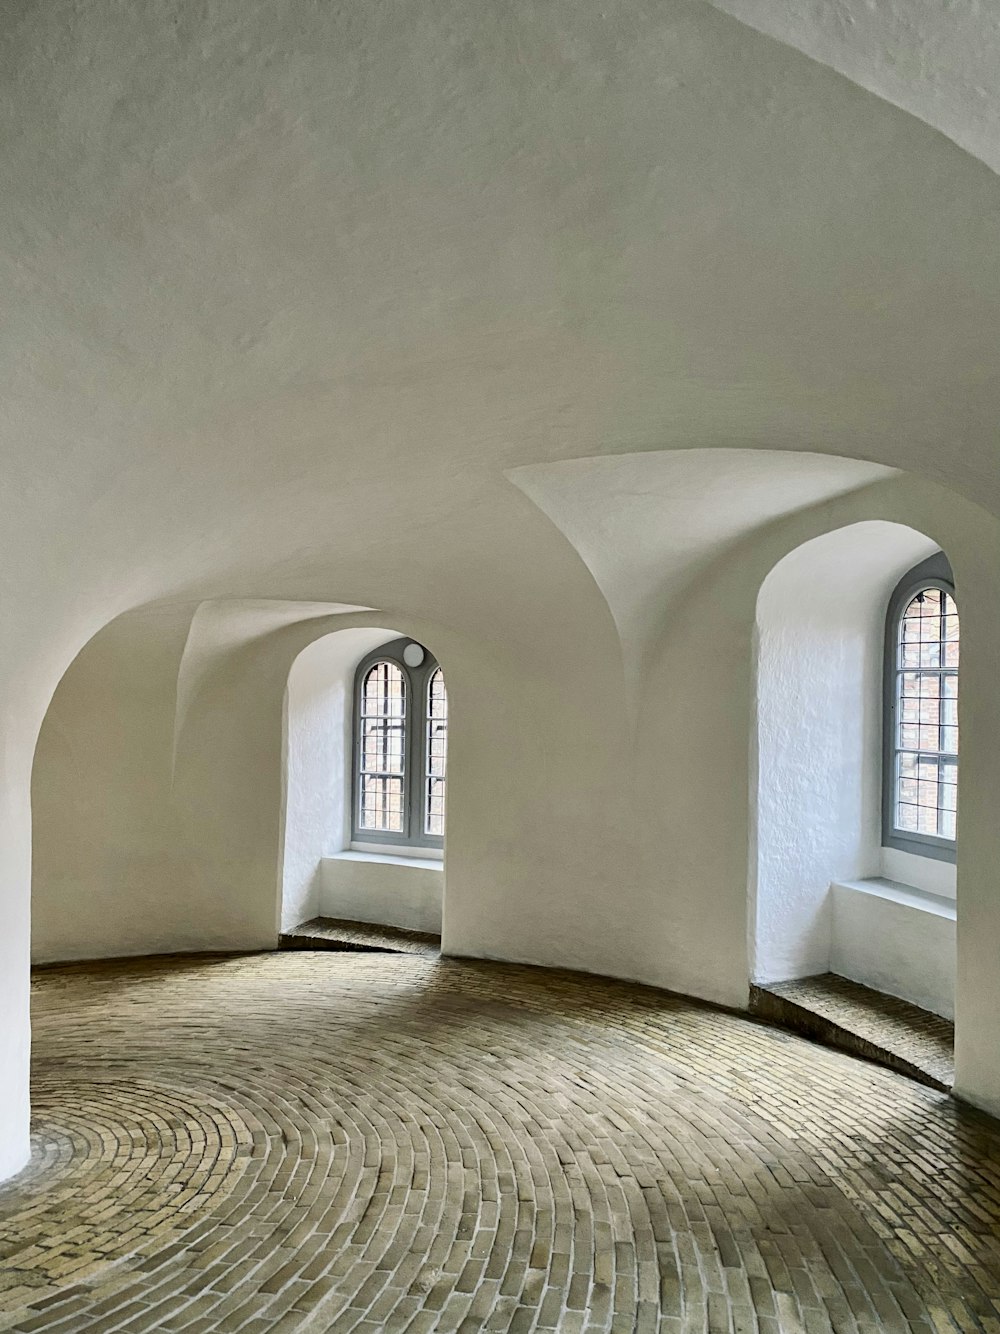 a circular room with arched windows and a brick floor